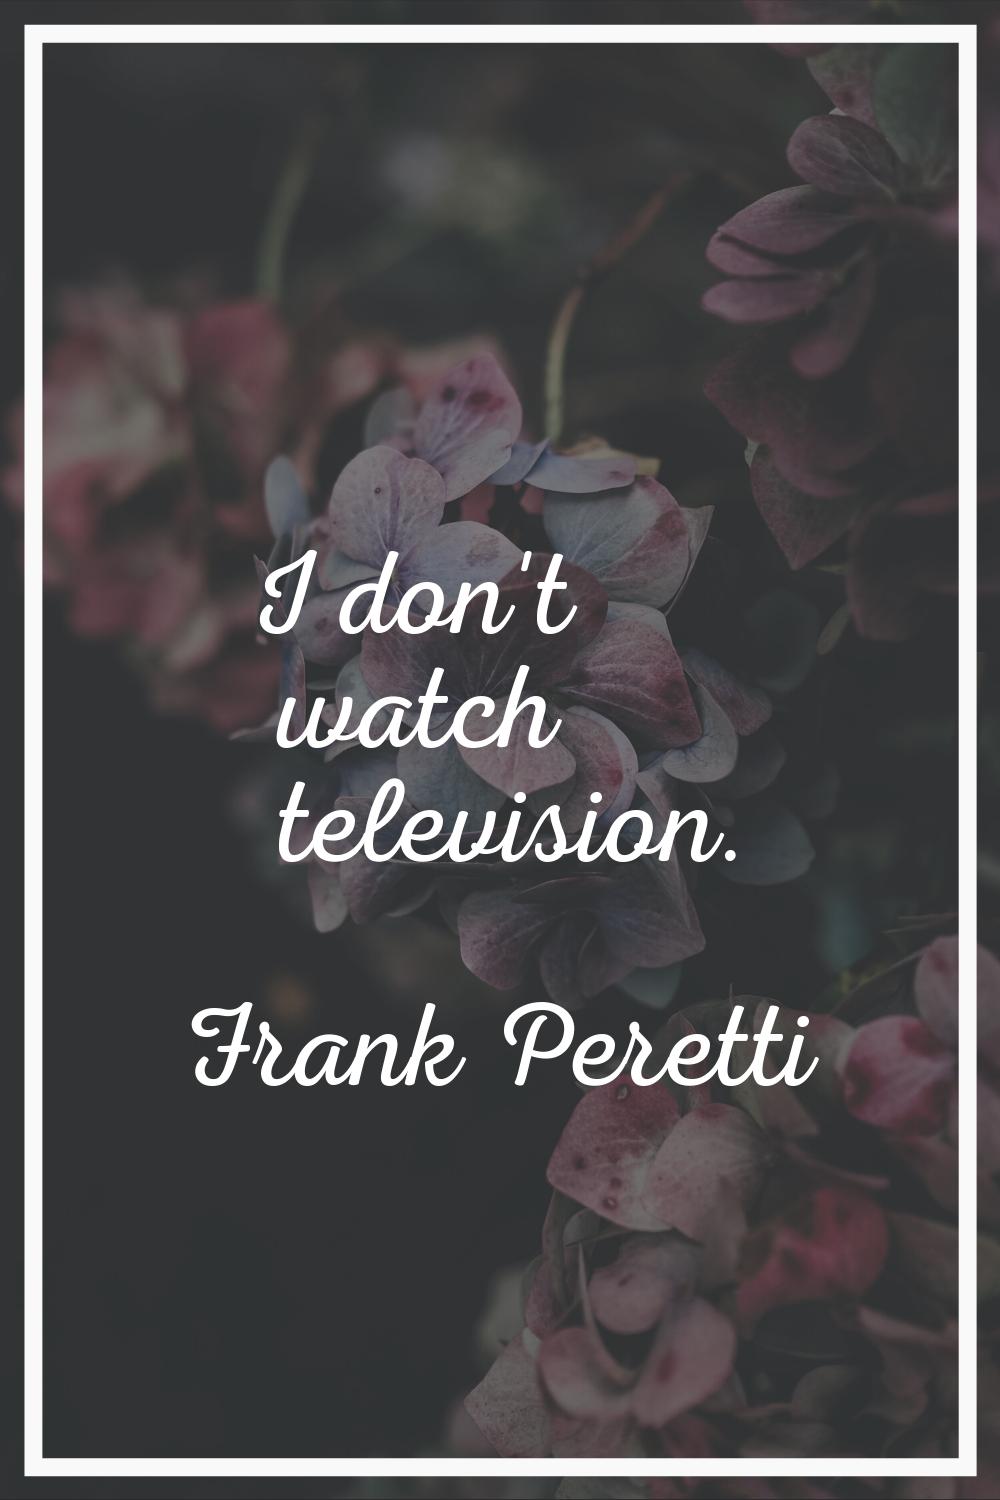 I don't watch television.